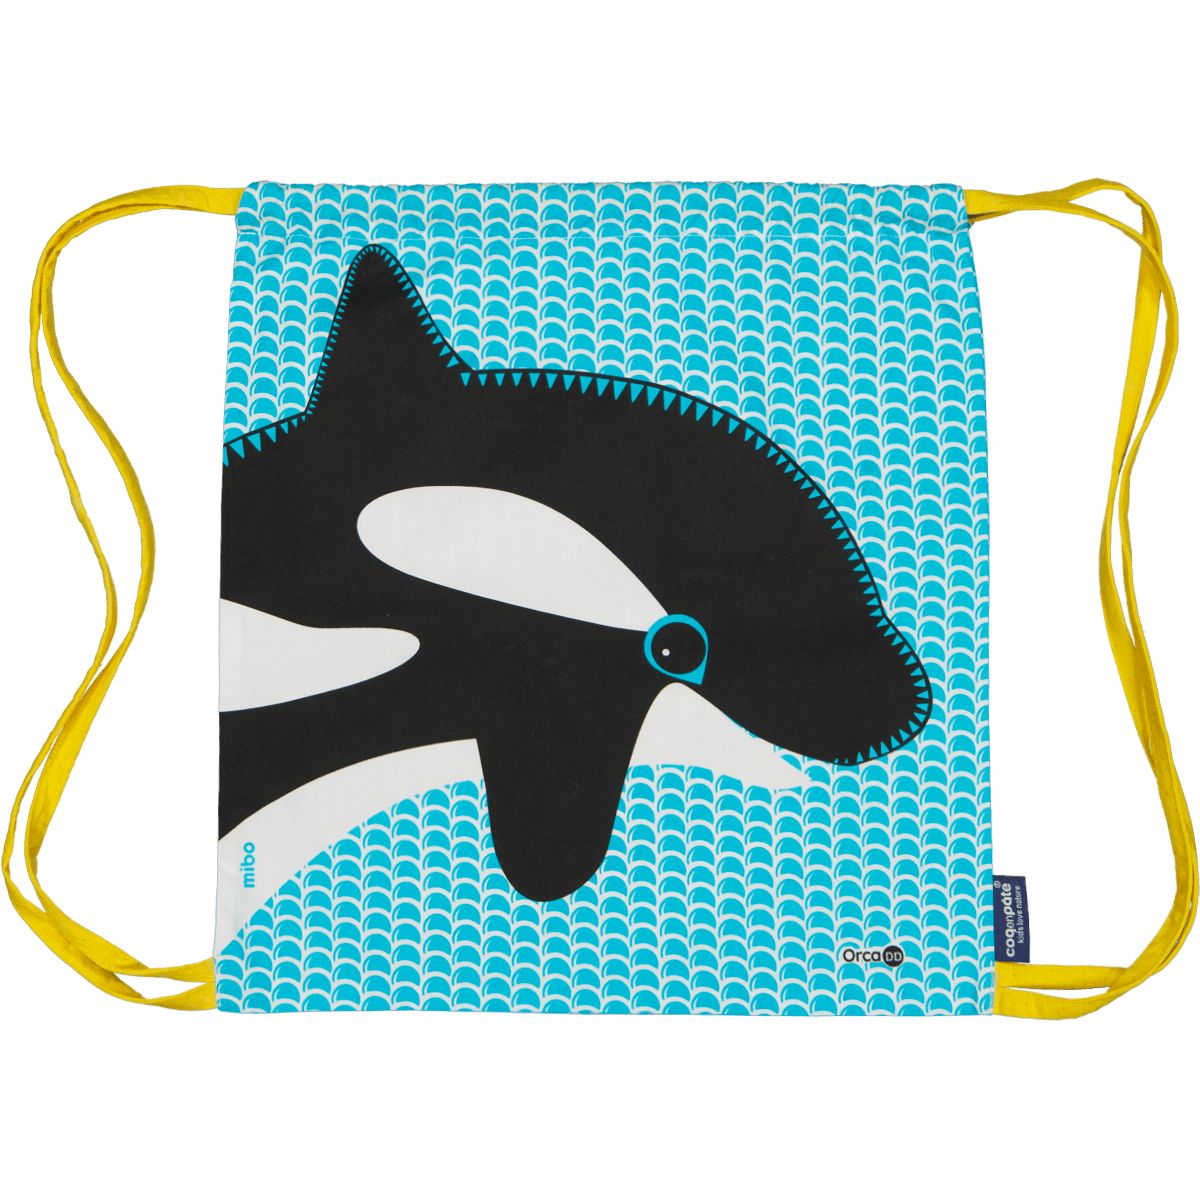 sustainable rucksack bag dolphin print